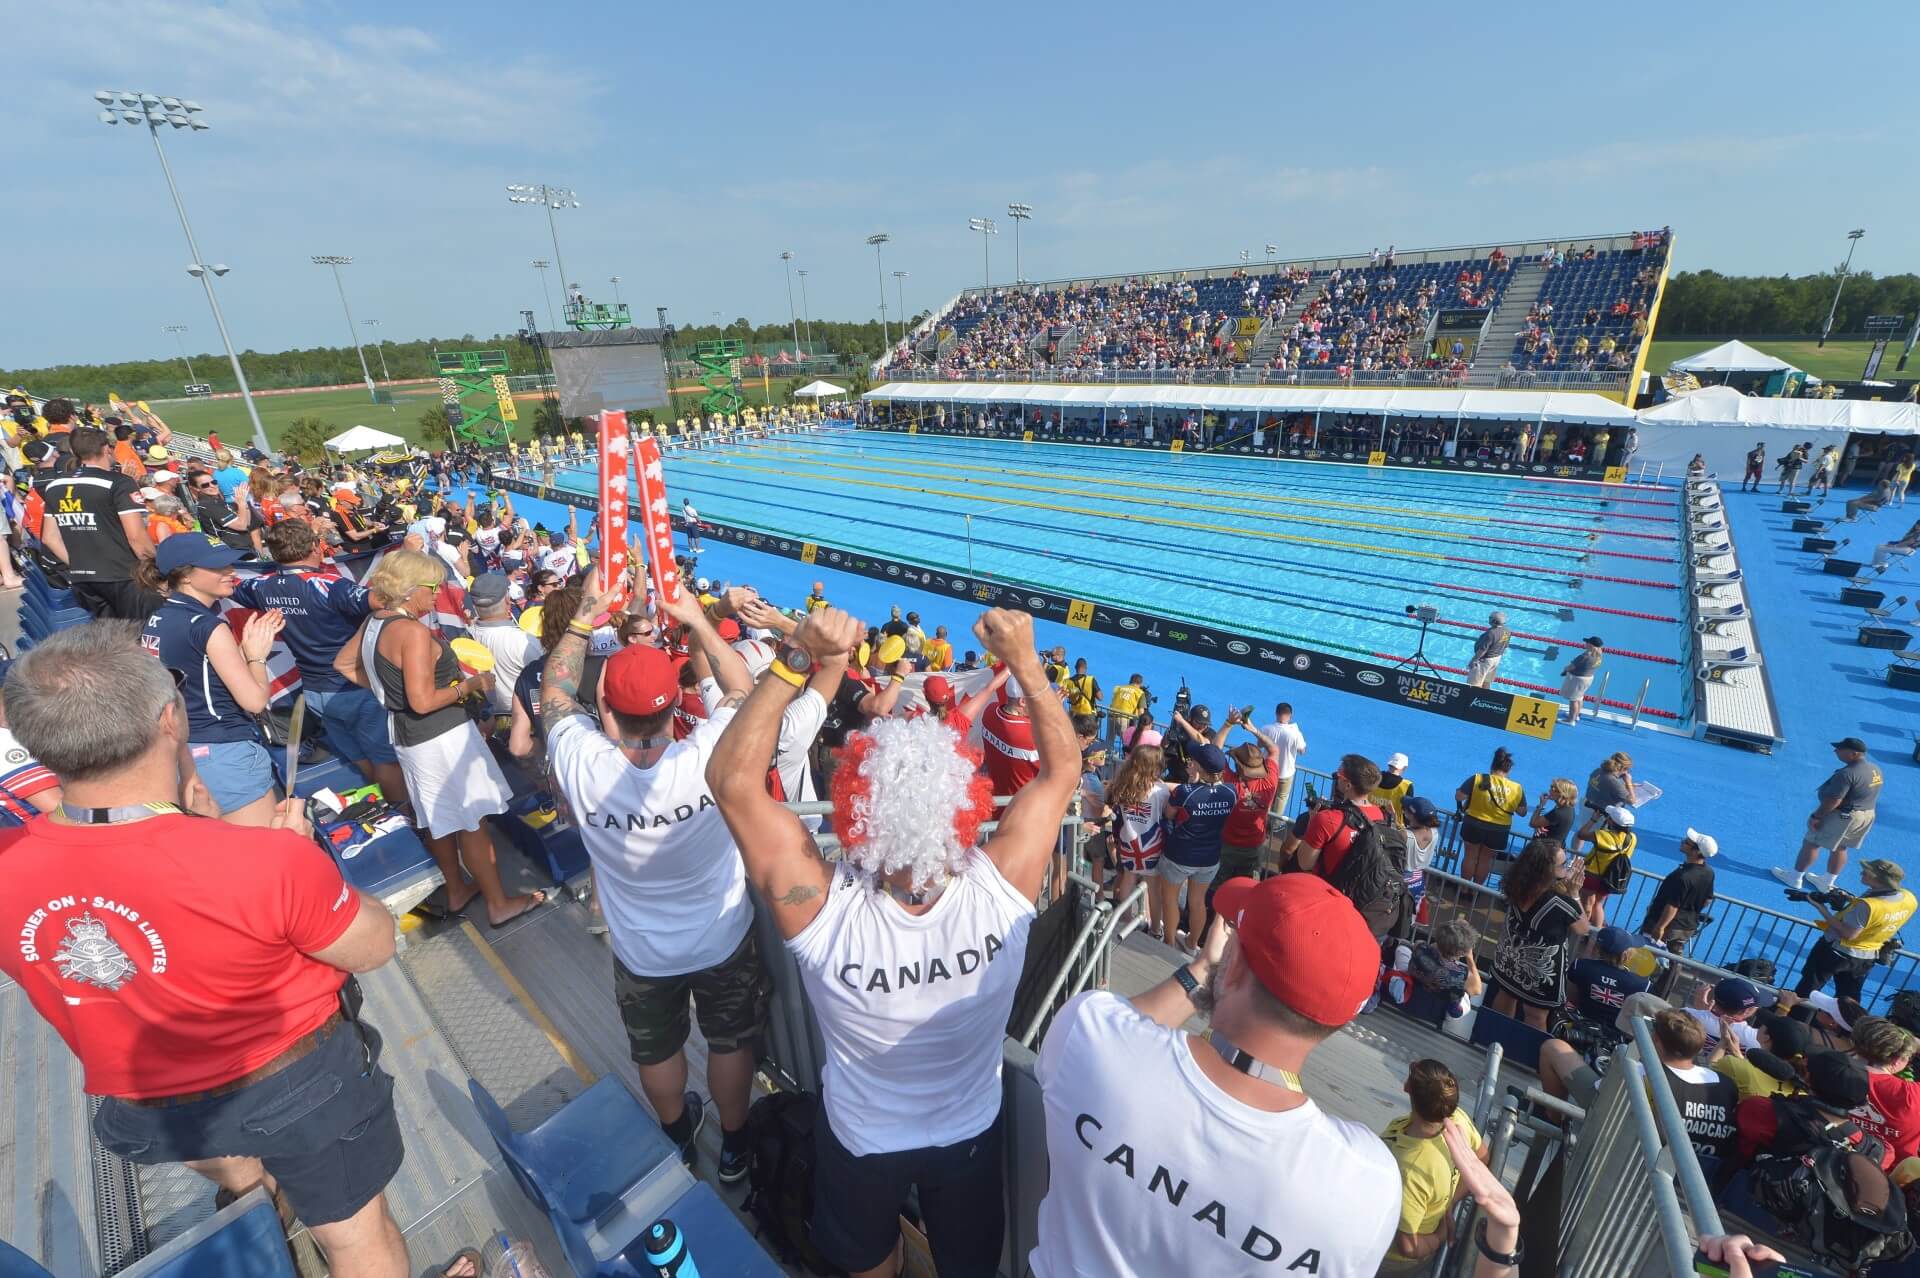 Crowd of international spectators at swimming competition for 2016 Invictus Games